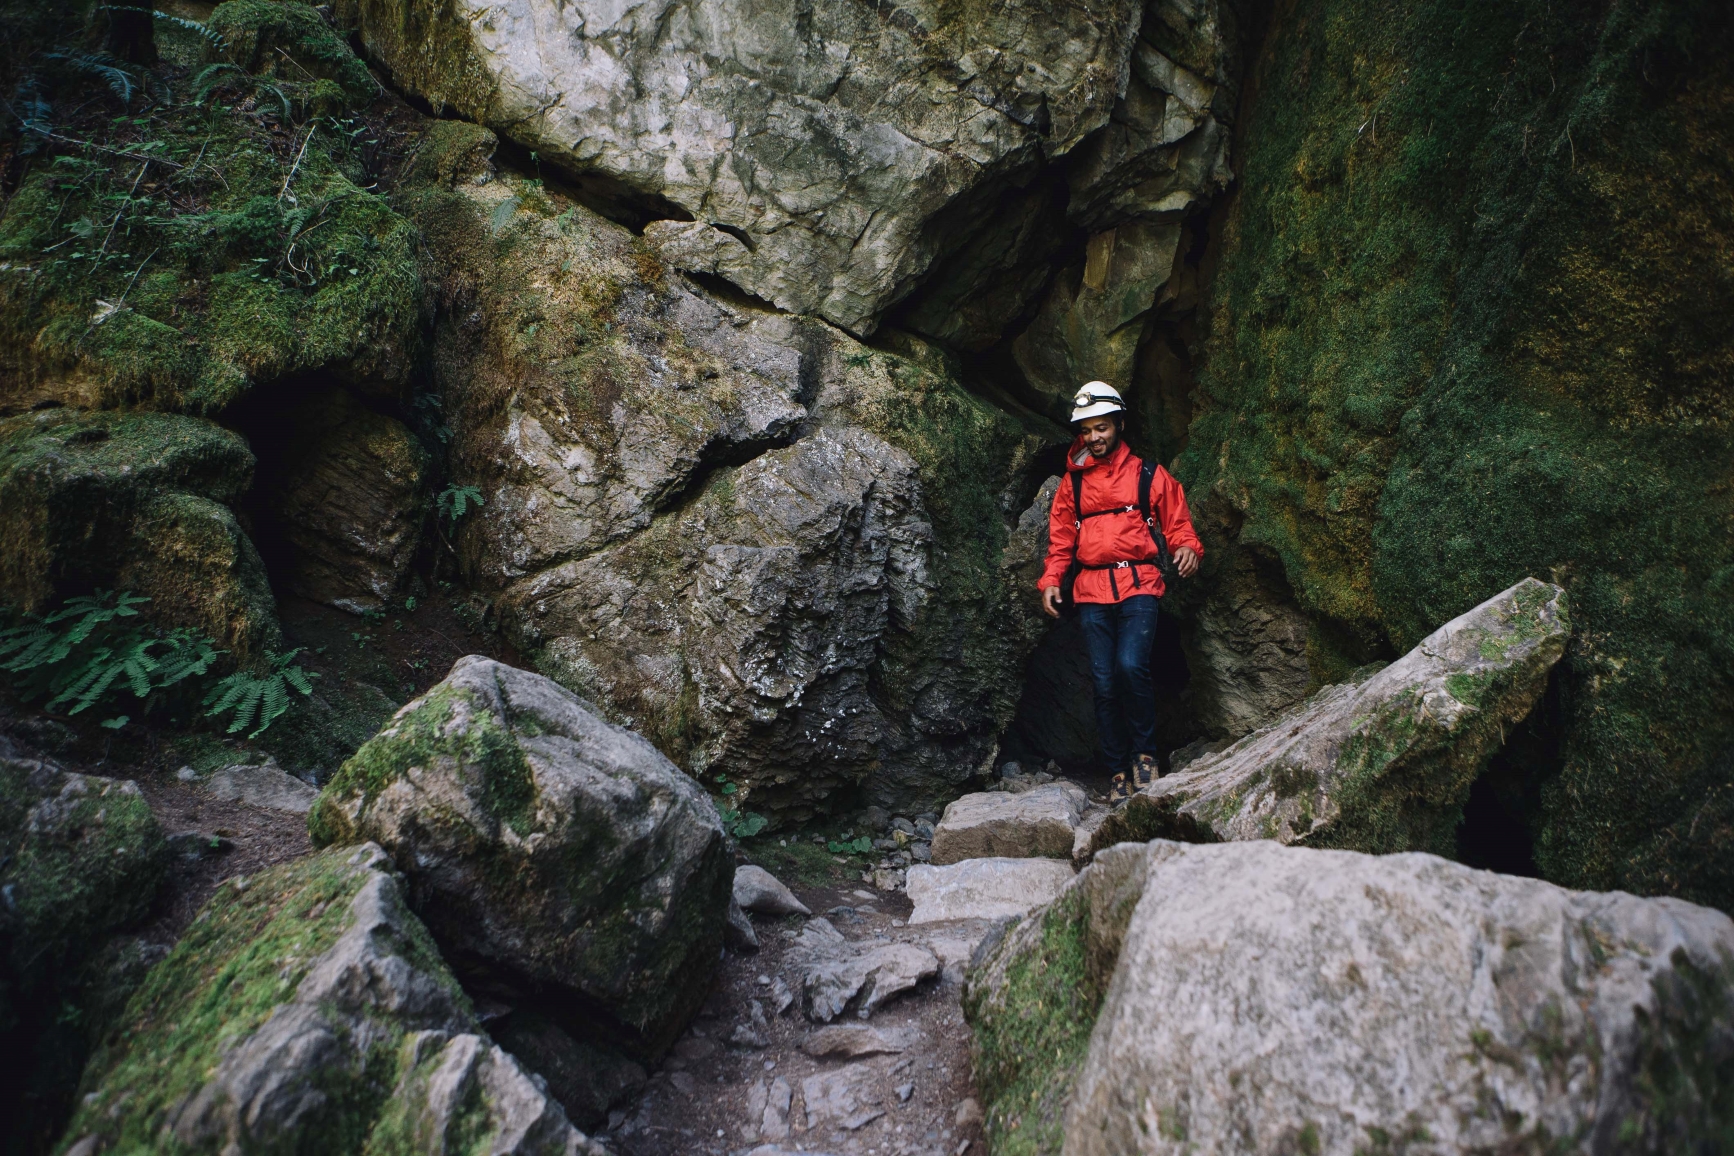 A park visitor with climbing gear and a helmet navigating through the rocky cave terrain.